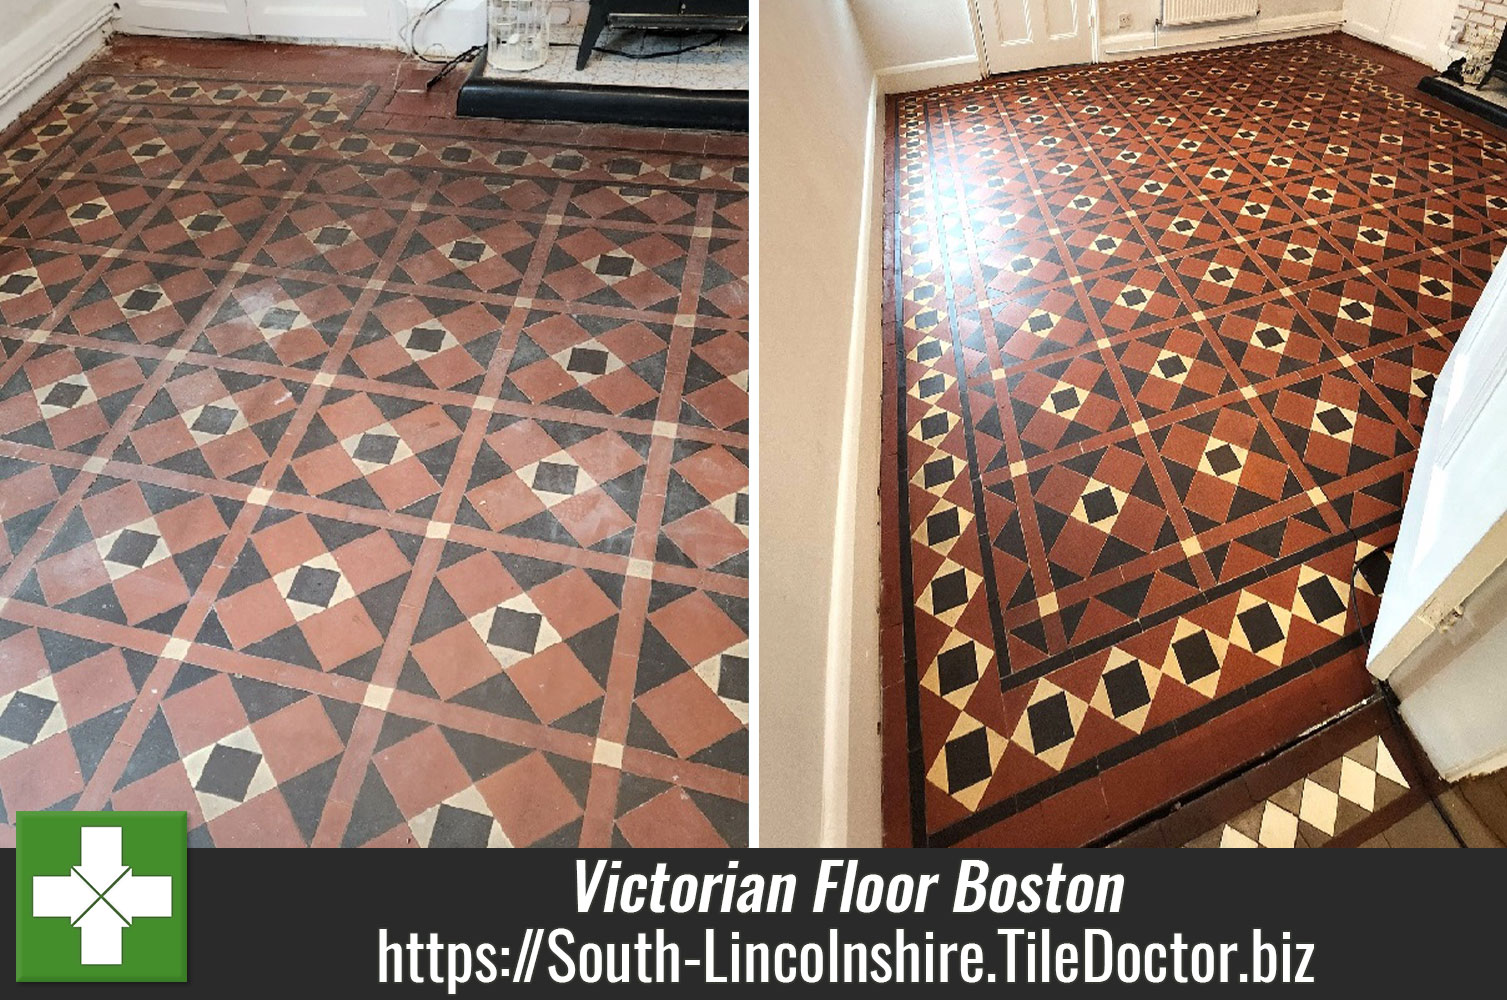 Tile Doctor Colour Used to Protect and Improve Victorian Floor Tiles in Boston Lincs